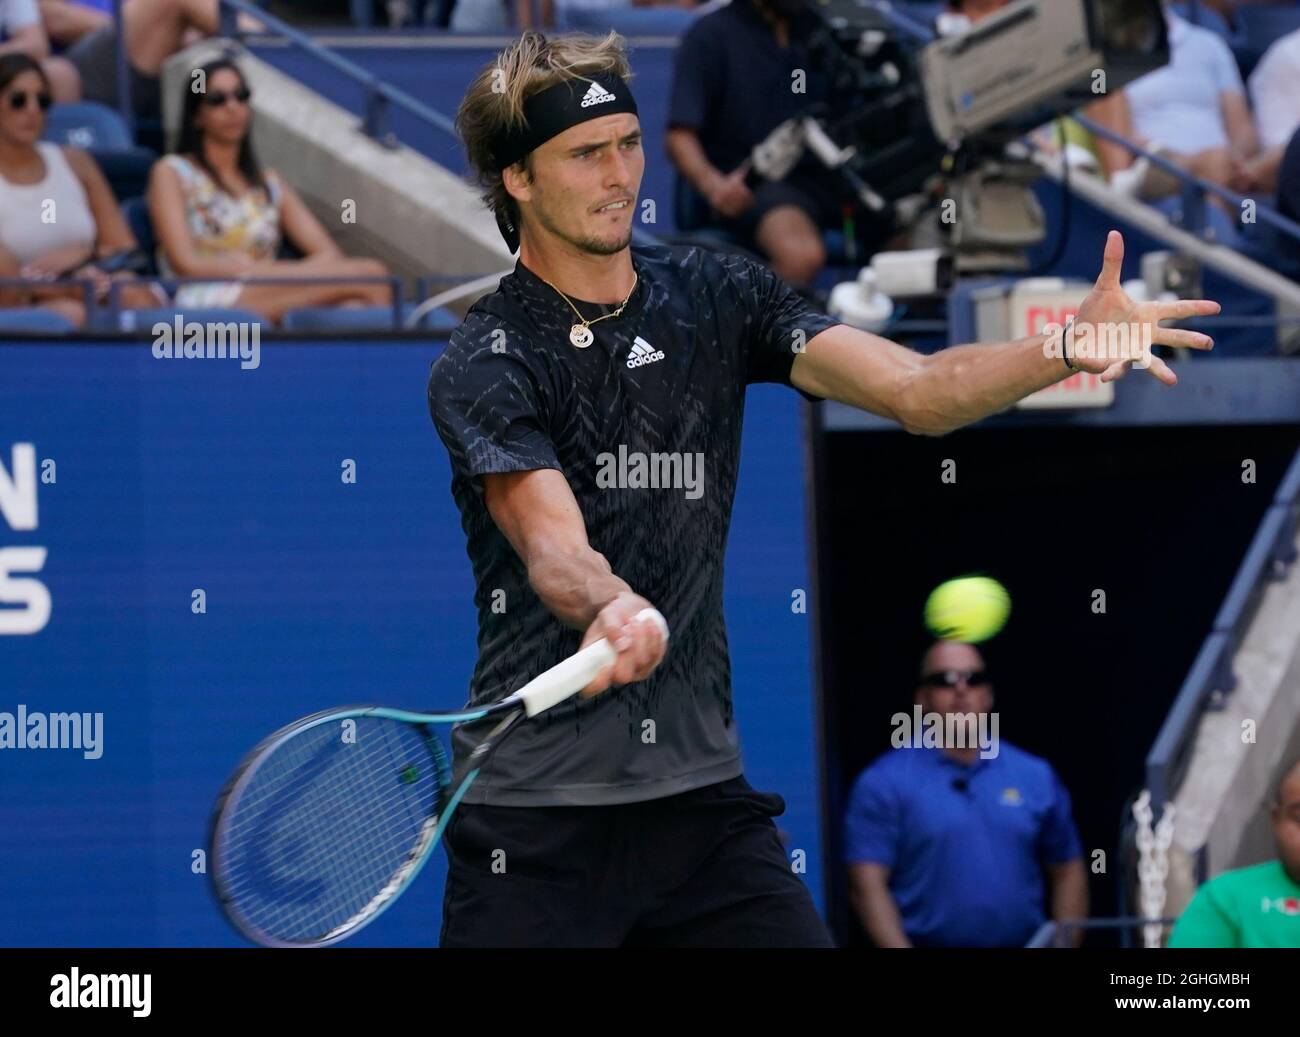 September 6, 2021 Jannik Sinner (ITA) loses to Alexander Zverev (GER), 6-4, 6-4, 7-6 at the US Open being played at Billy Jean King Ntional Tennis Center in Flushing, Queens, New York, 